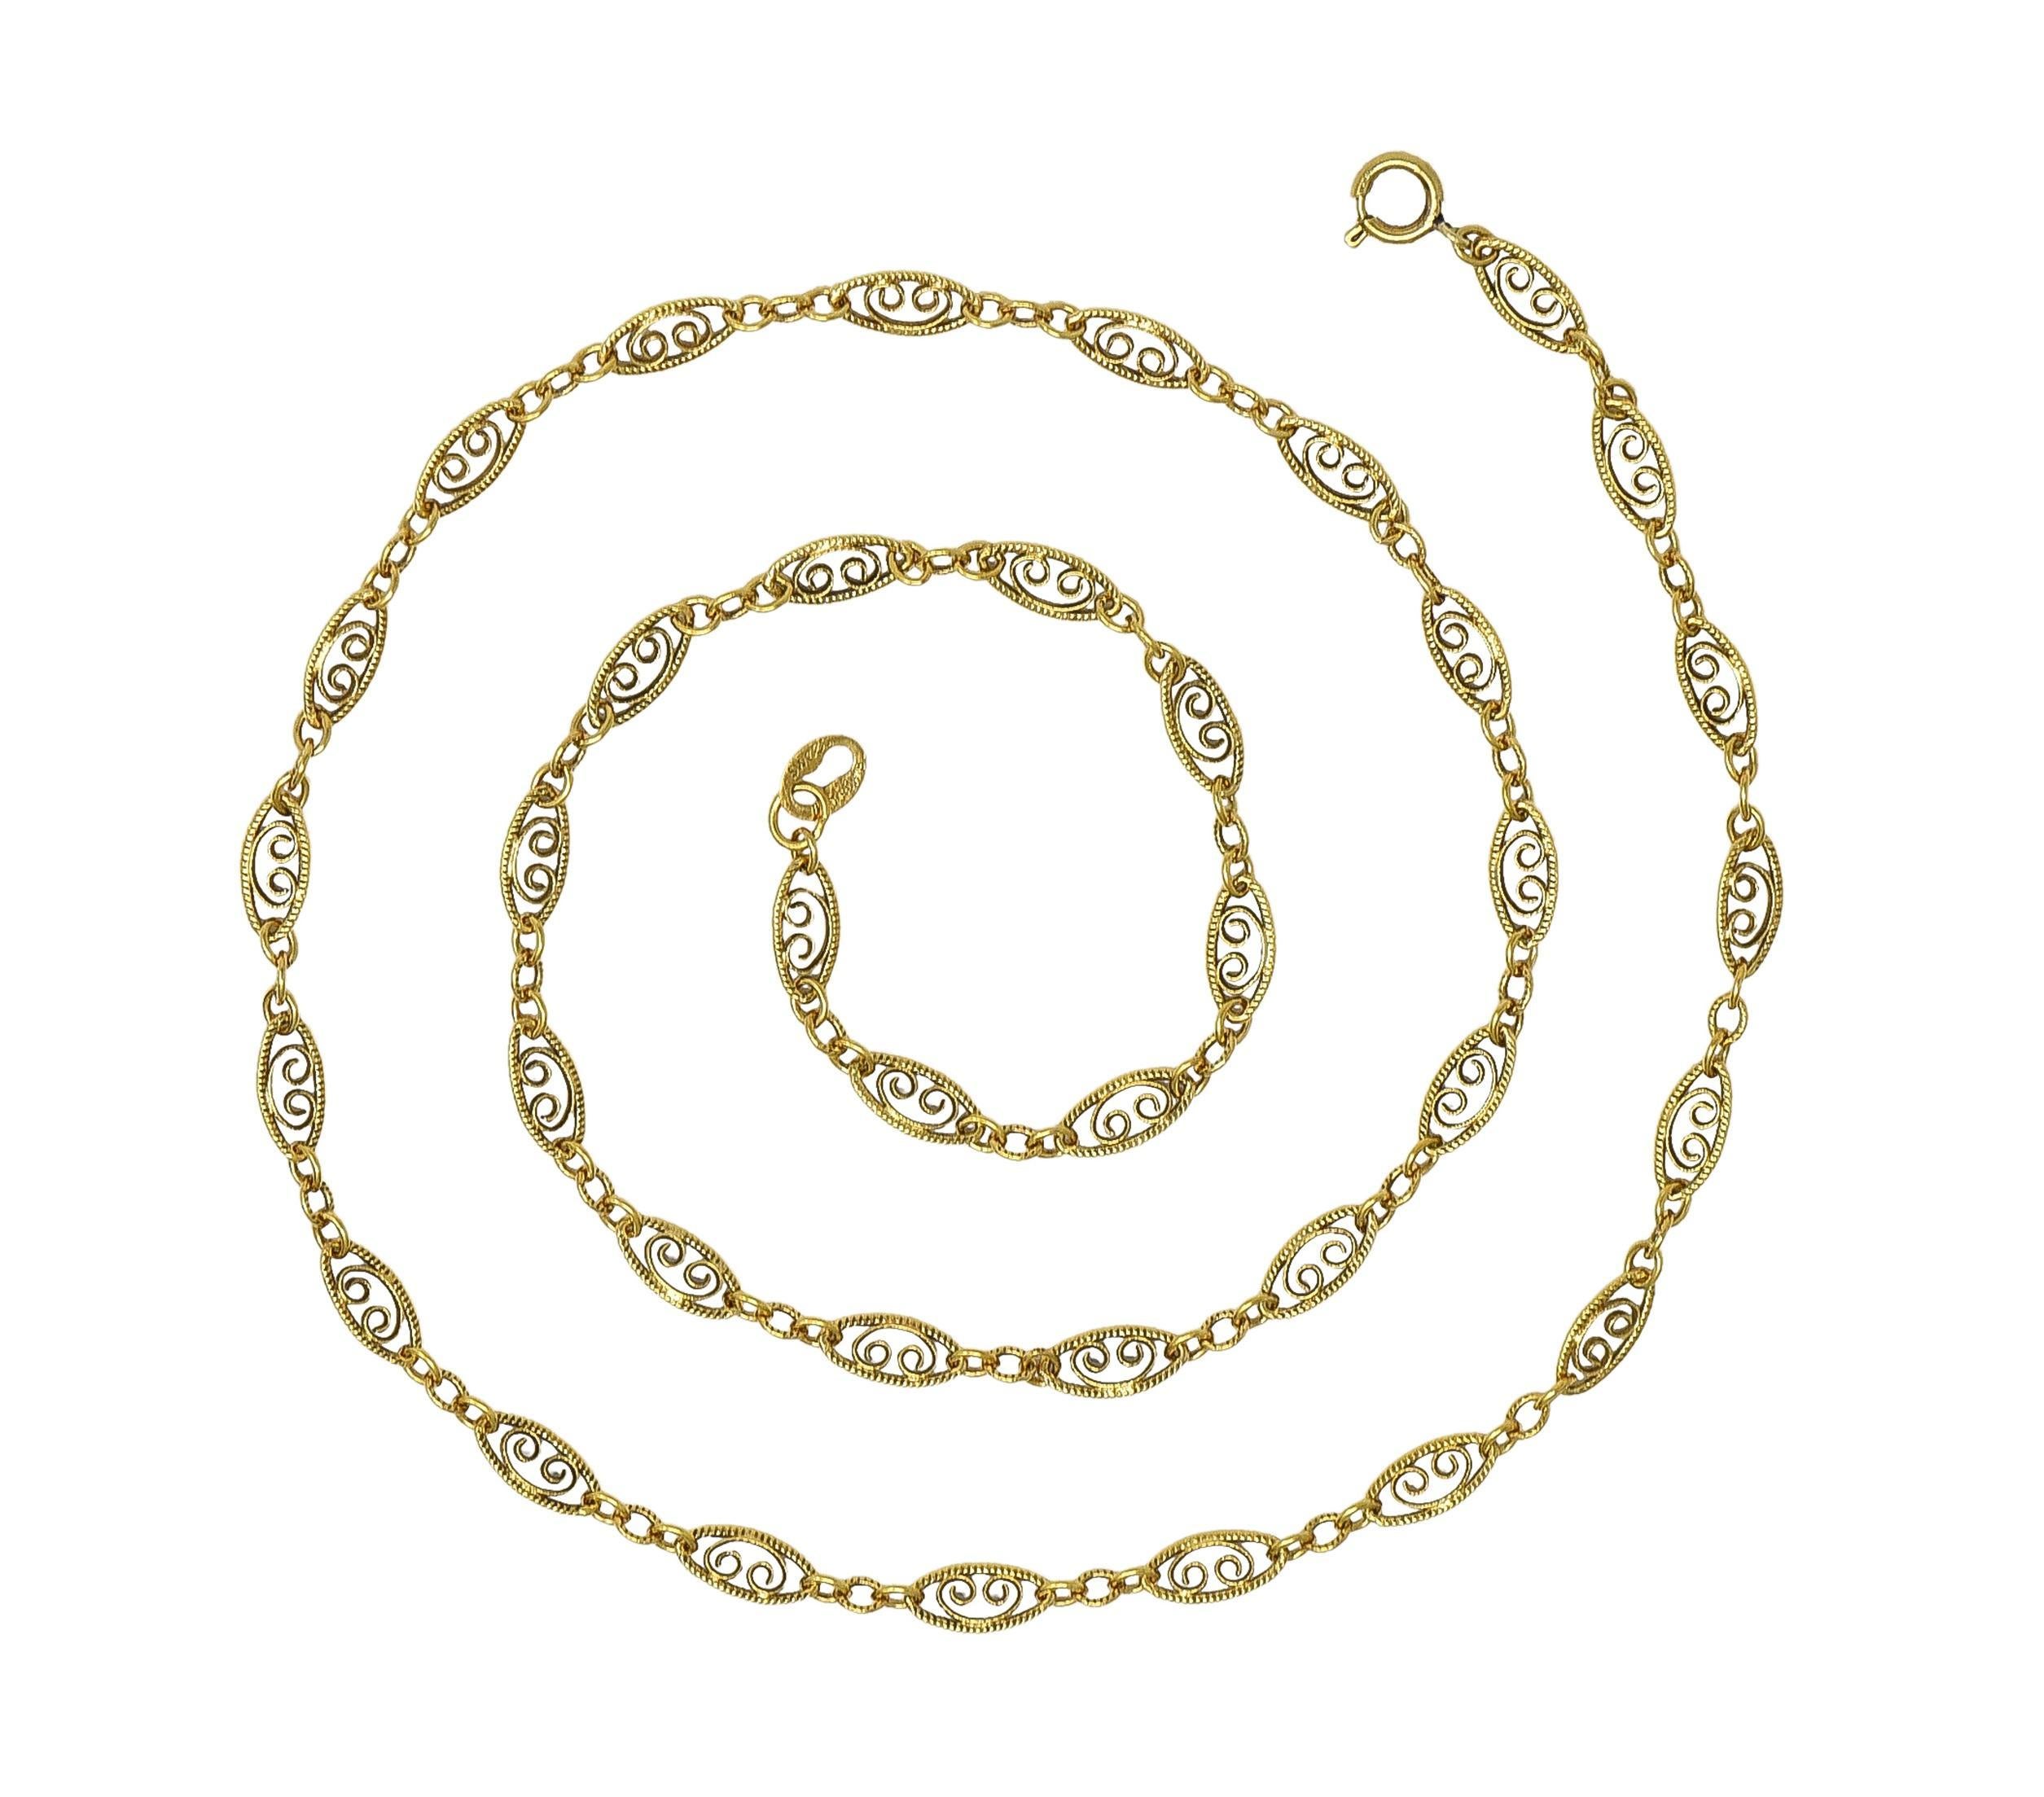 Comprised of navette-shaped links alternating with cable link chain segments 
Navette-shaped links center scrolling 'C' motif 
With milgrain detail throughout 
Completed by spring clasp closure
Stamped for 14 karat gold 
With maker's mark
Circa: